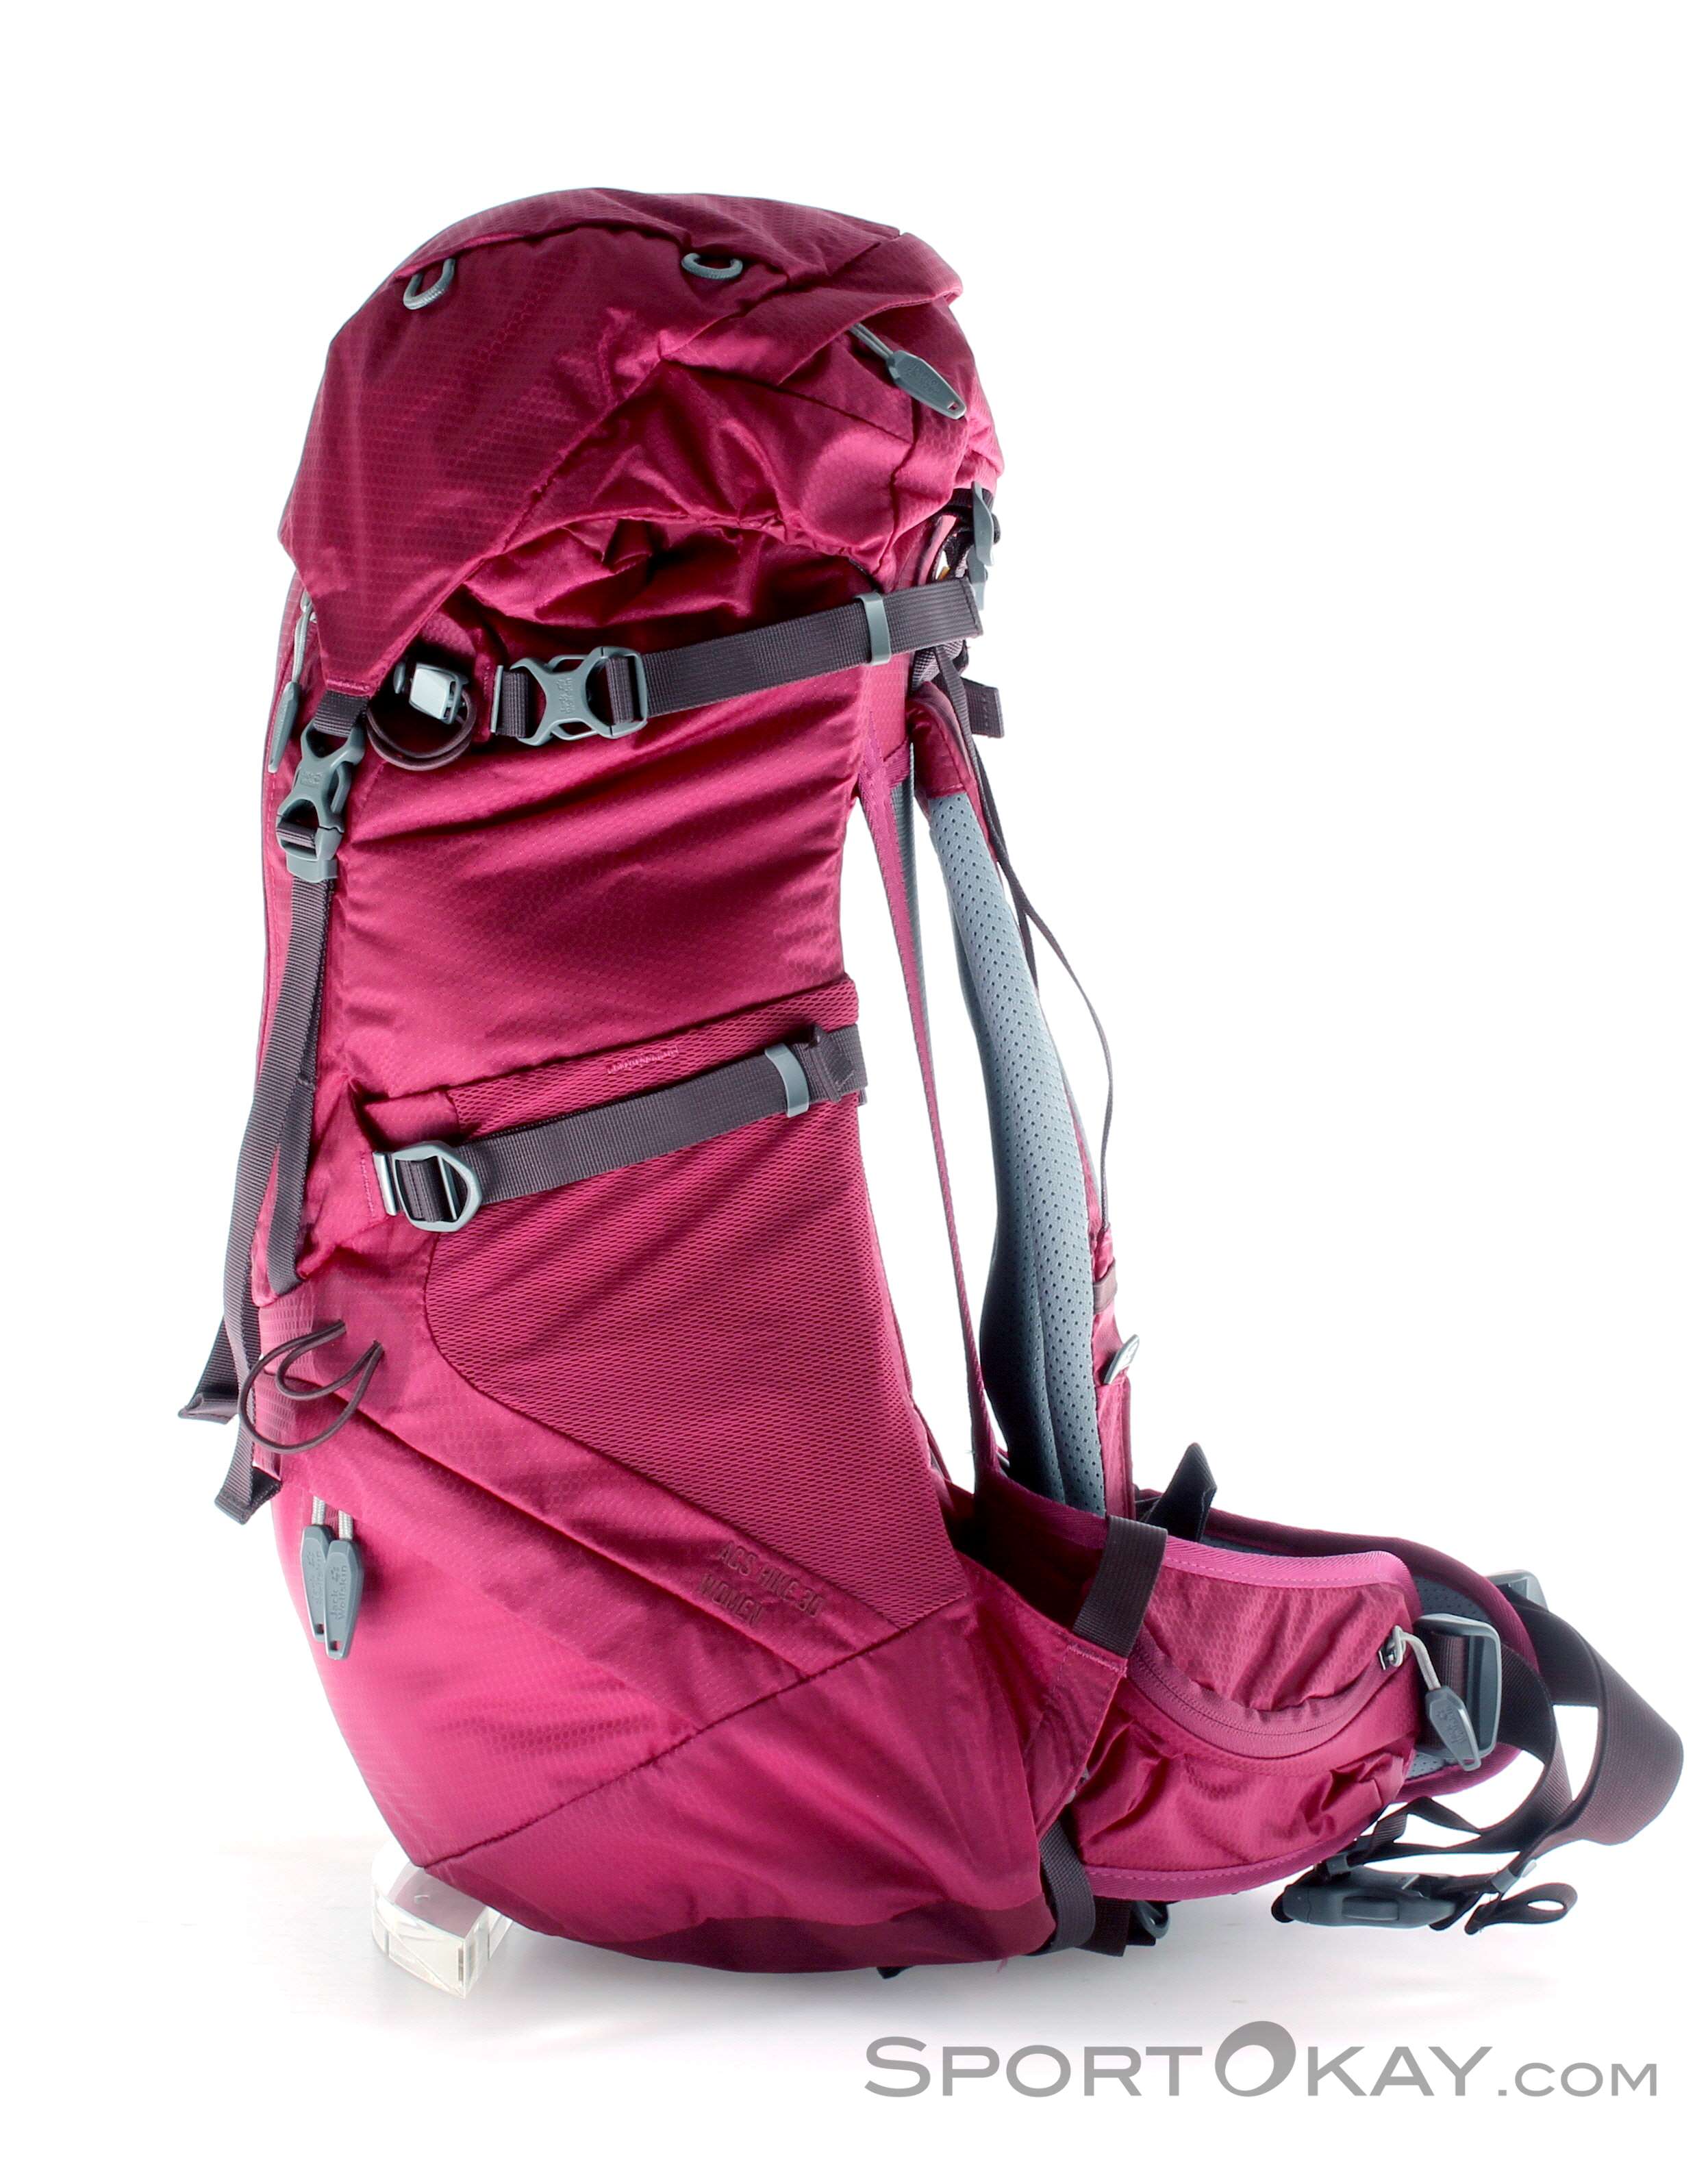 ACS Hike Pack W 30l Womens Backpack - Backpacks - & Headlamps - Outdoor - All